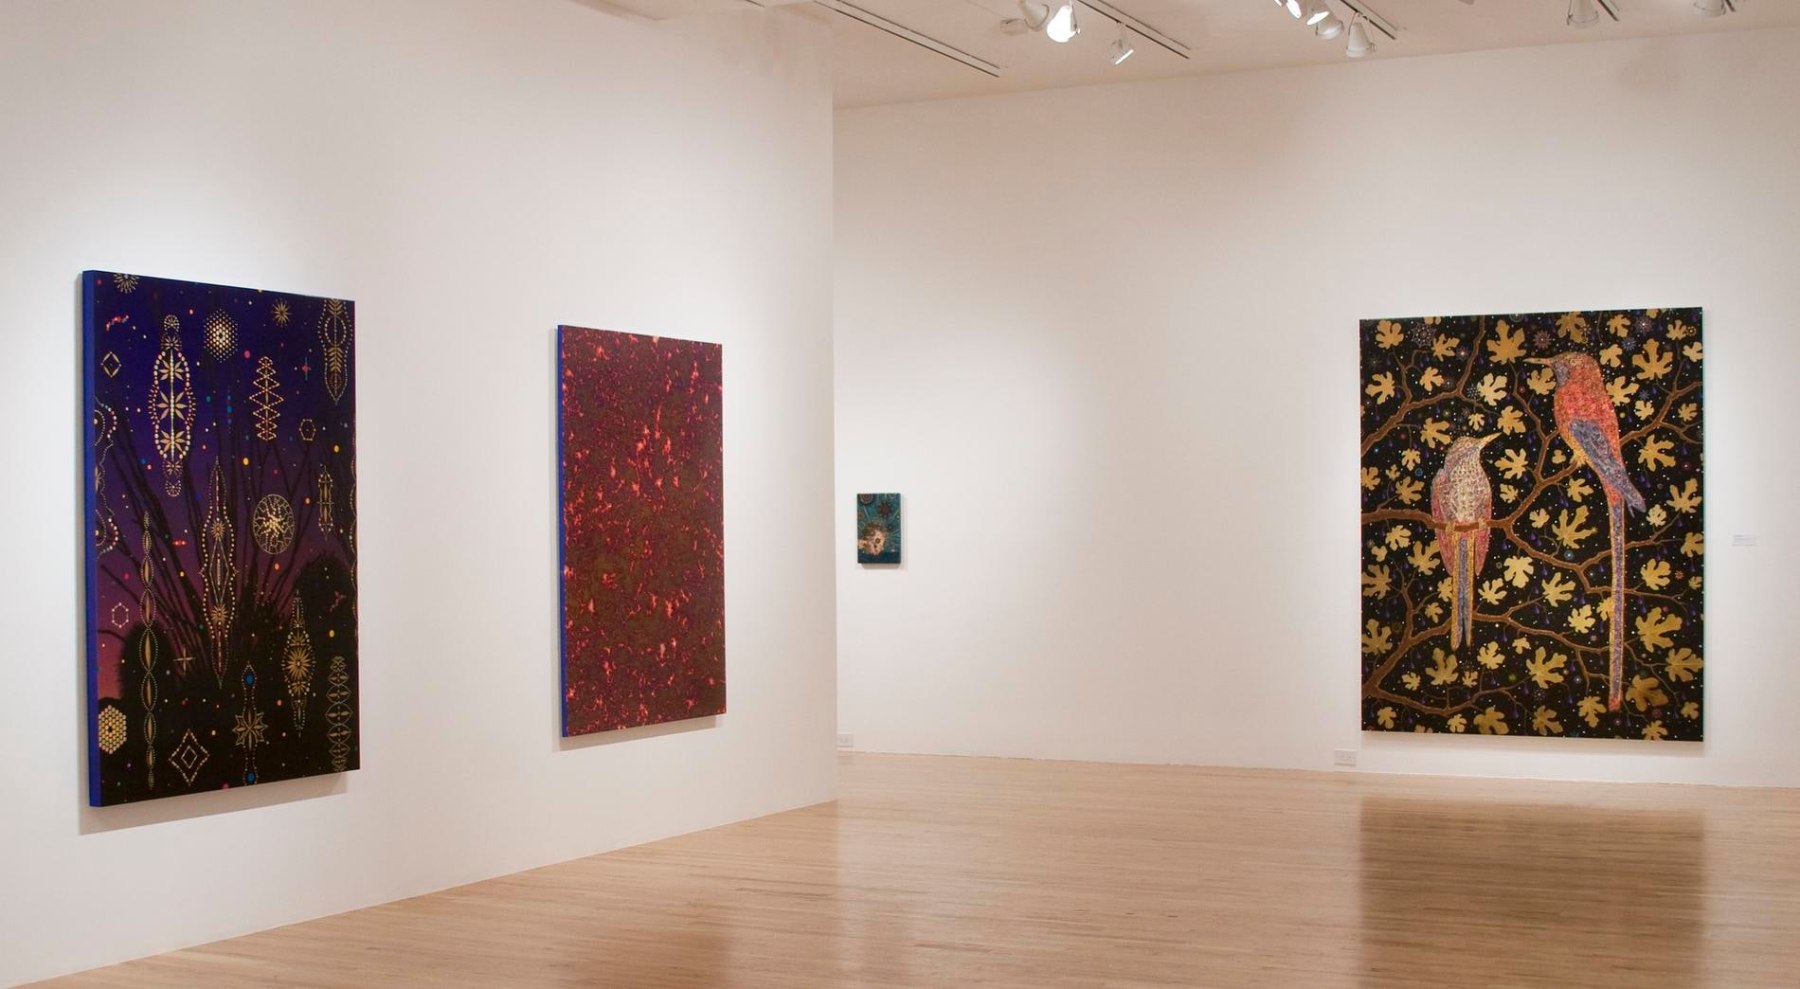 Exhibition view of three of Fred Tomaselli's artworks